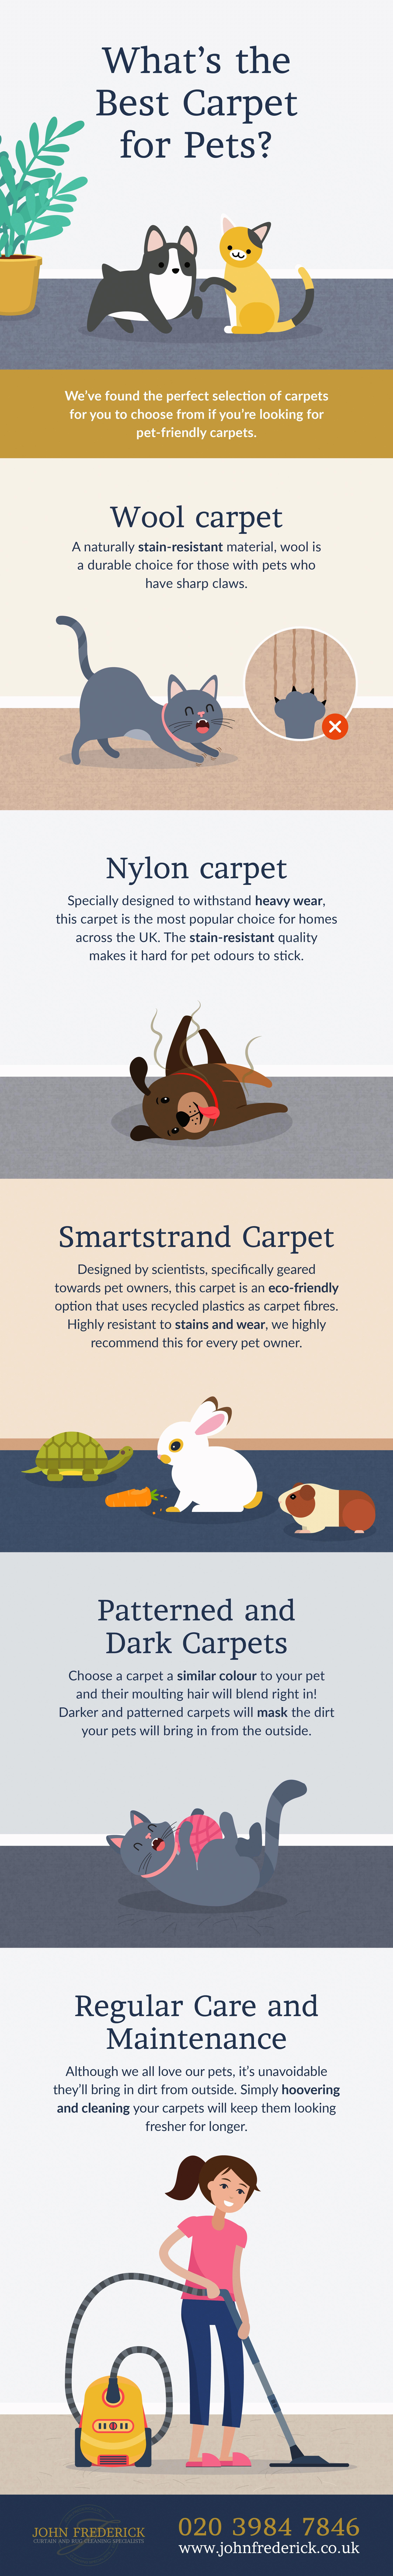 what's the best carpet for pets? Infographic created by John Frederick Ltd.